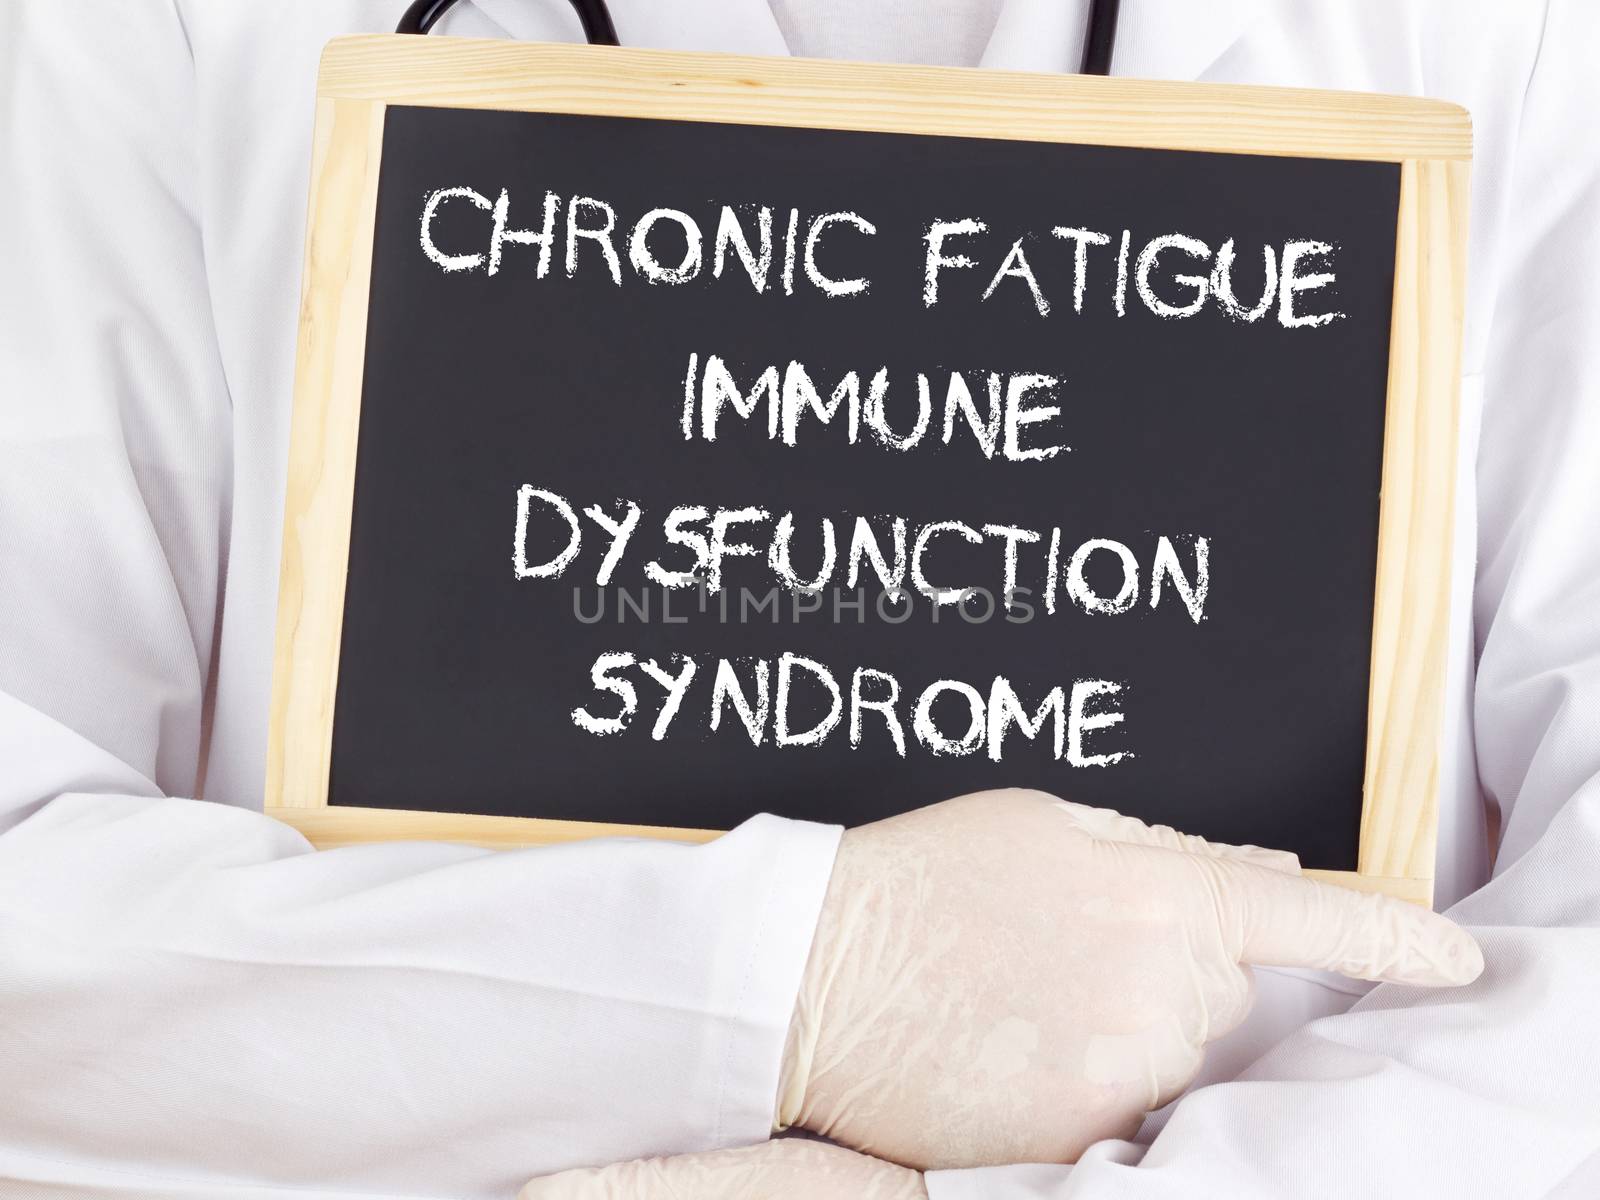 Doctor shows information: chronic fatigue syndrome immune dysfunction syndrome